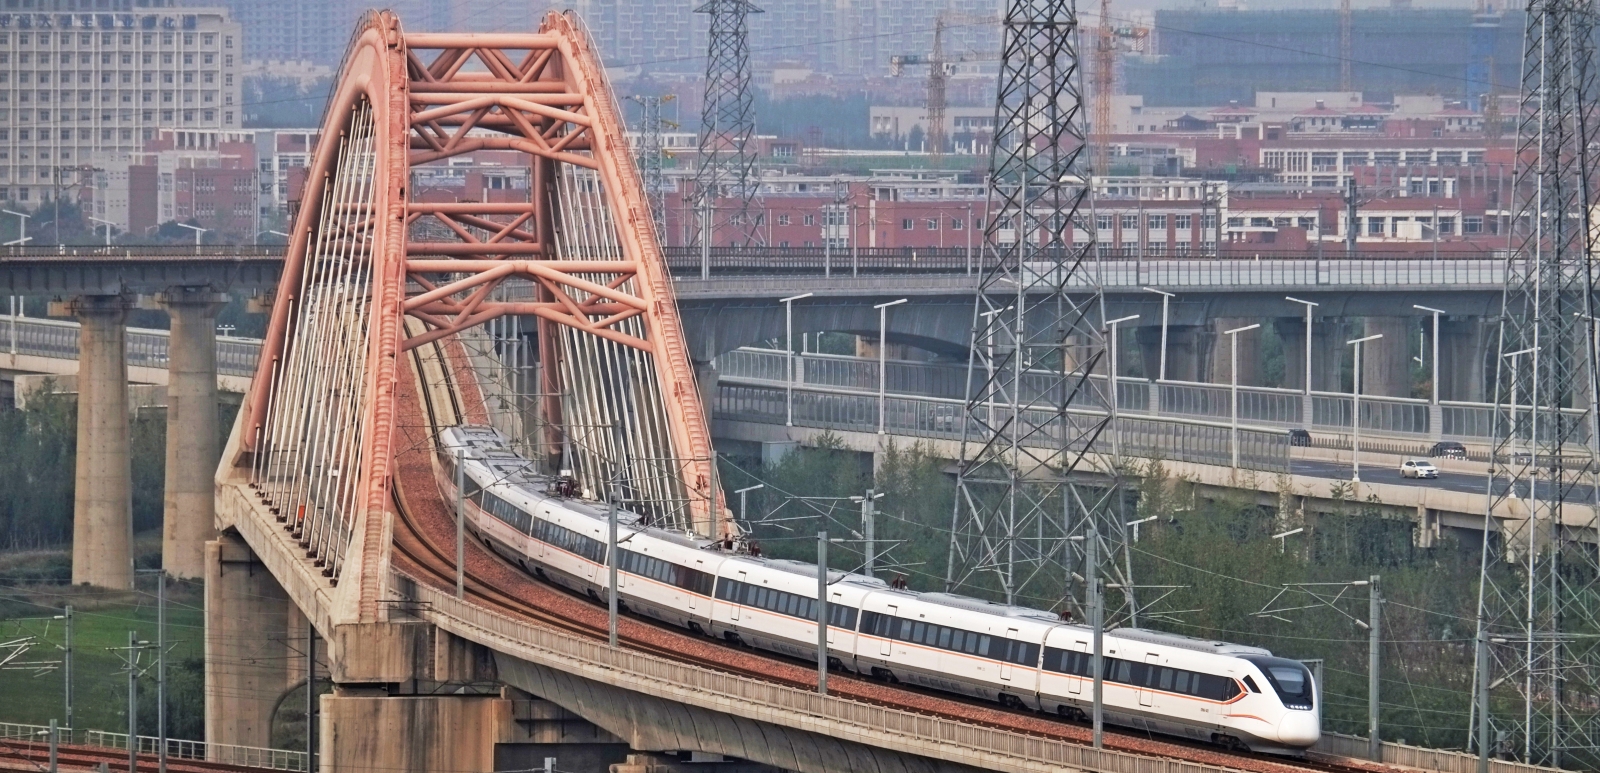 CRH6A-0425 in October 2018 on the Zhengzhou-Kaifeng route